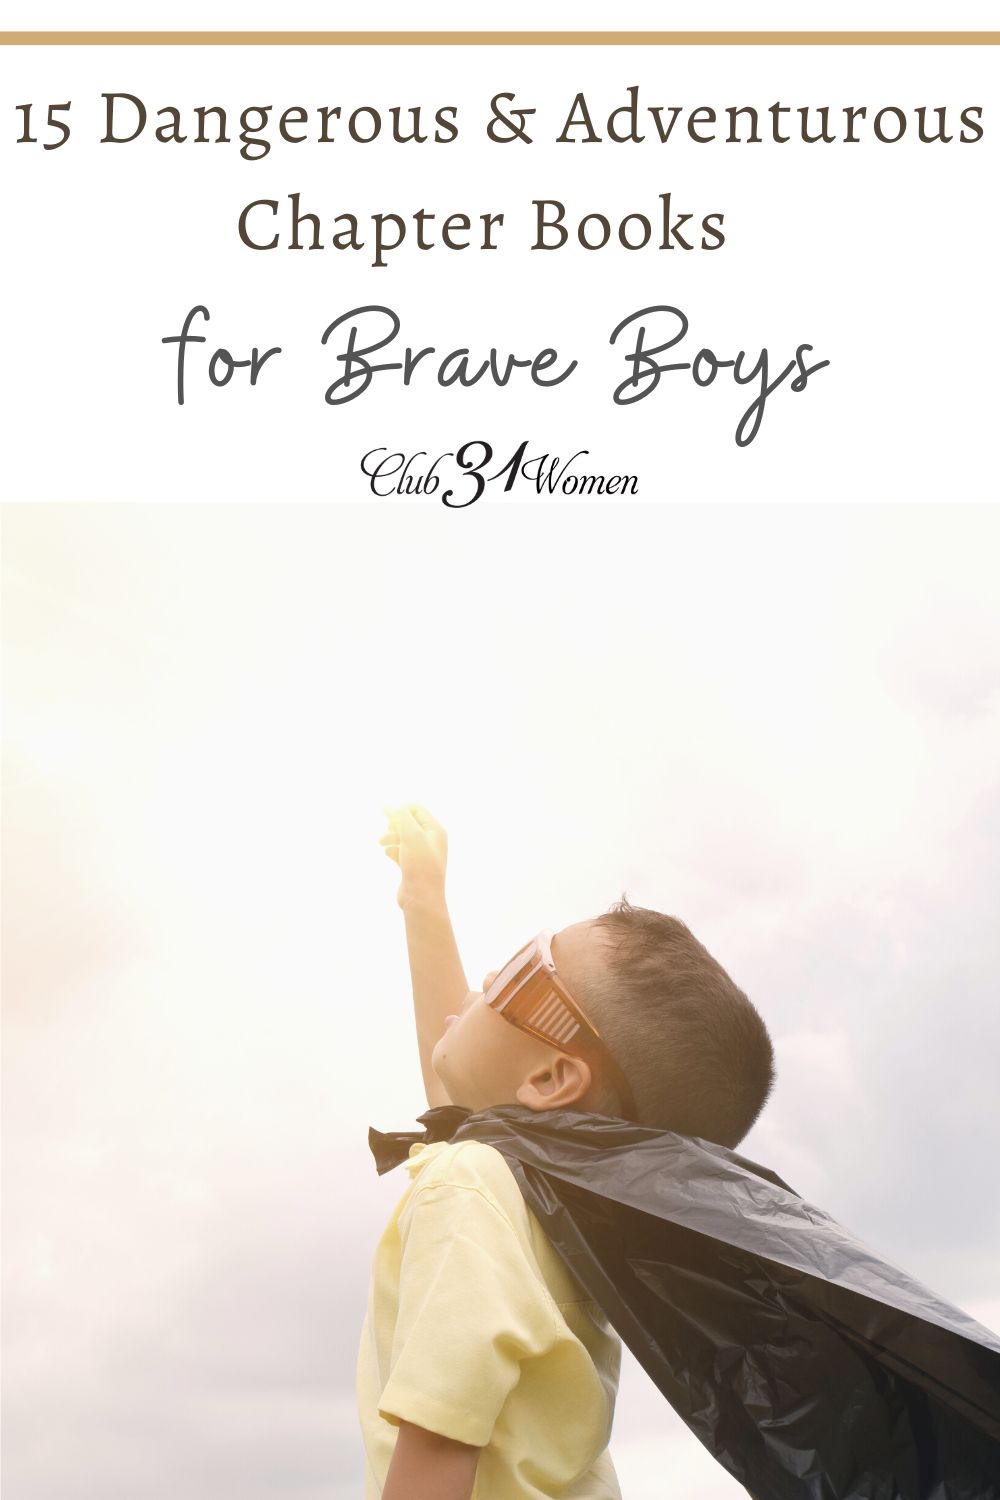 Finding great books for brave boys doesn't have to be impossible. Here is a fantastic list to get you started! via @Club31Women